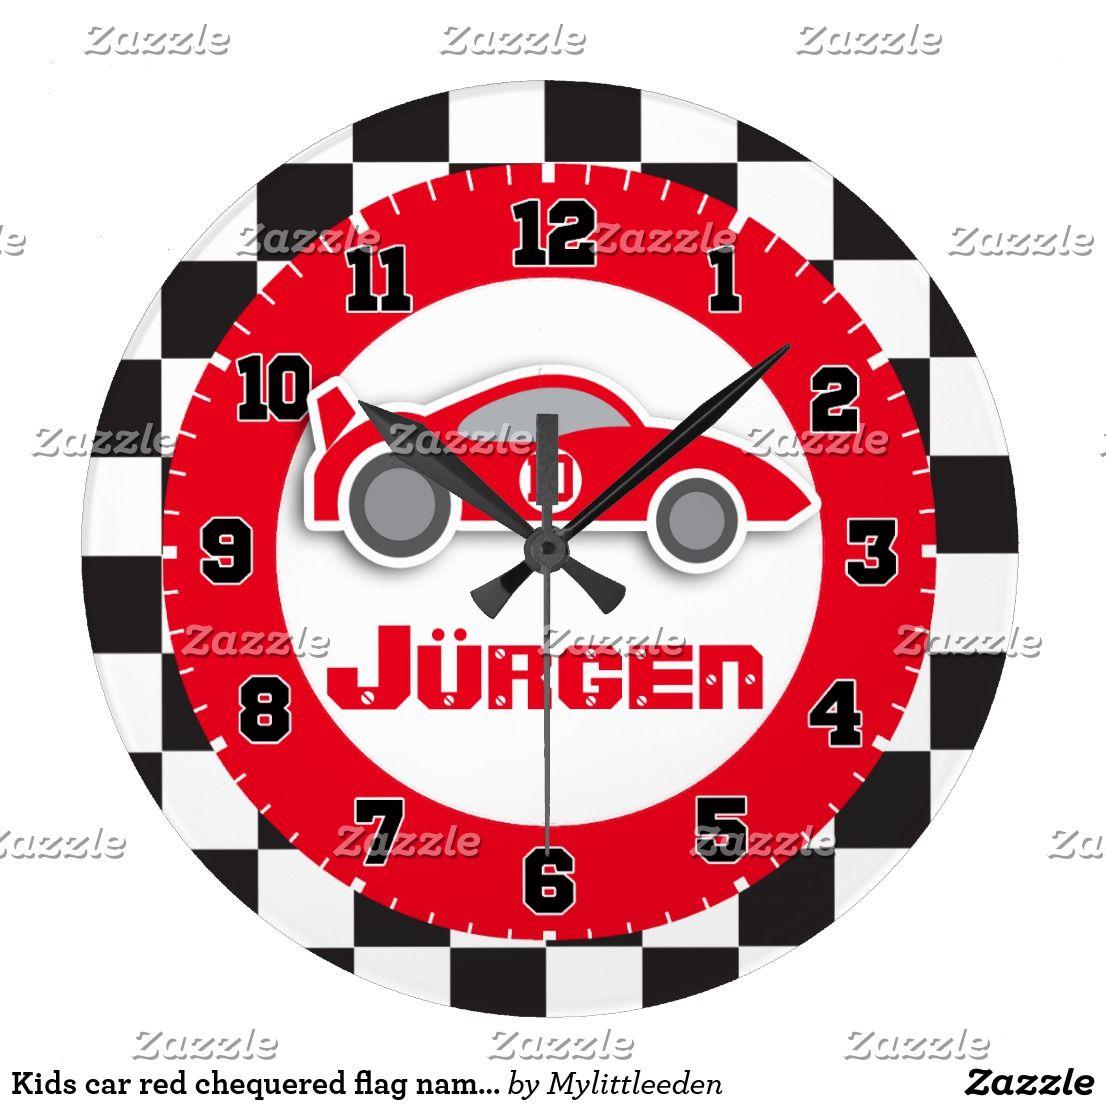 Red Checkered Flag Car Logo - Kids car red chequered flag name wall clock. Personalized Christmas